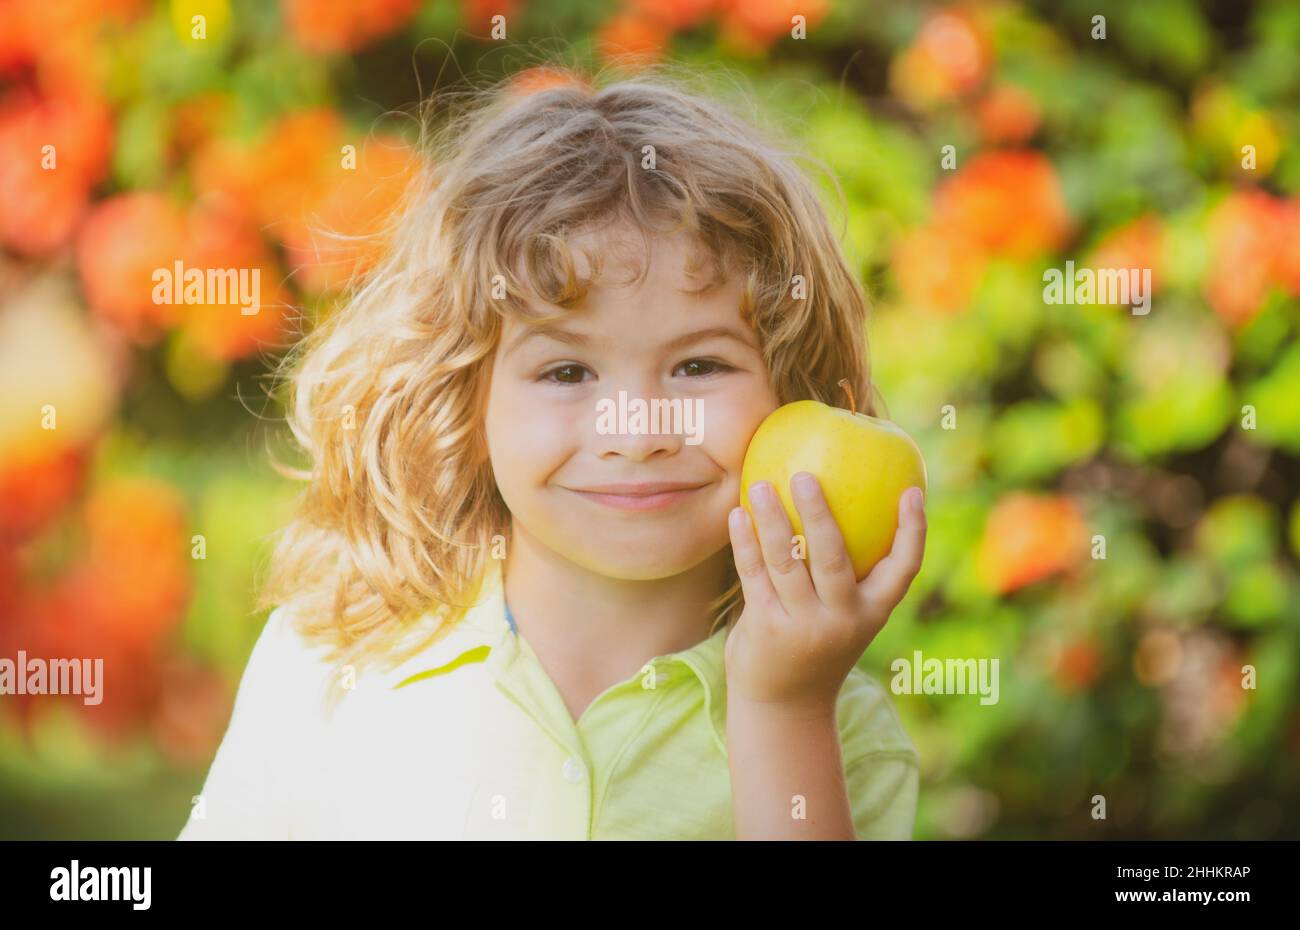 Child kid eating apple fruit outdoor autumn fall nature healthy outdoors. Stock Photo